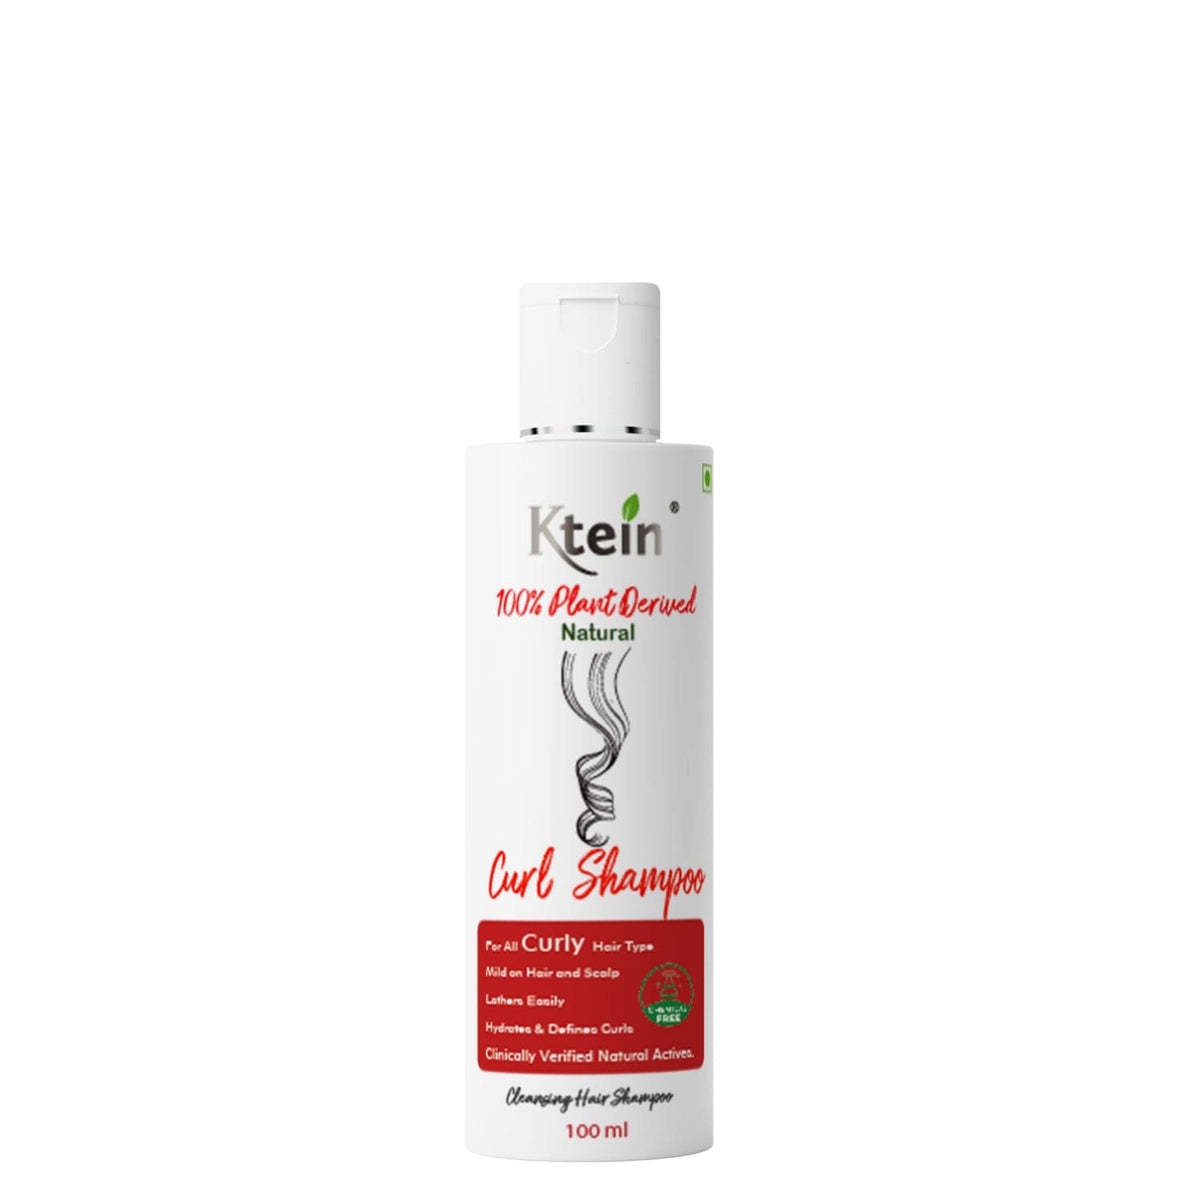 Ktein 100% Plant Derived Natural Curl Shampoo & Conditioner Combo - 100ml - Ktein Cosmetics By Ktein Biotech Private Limited